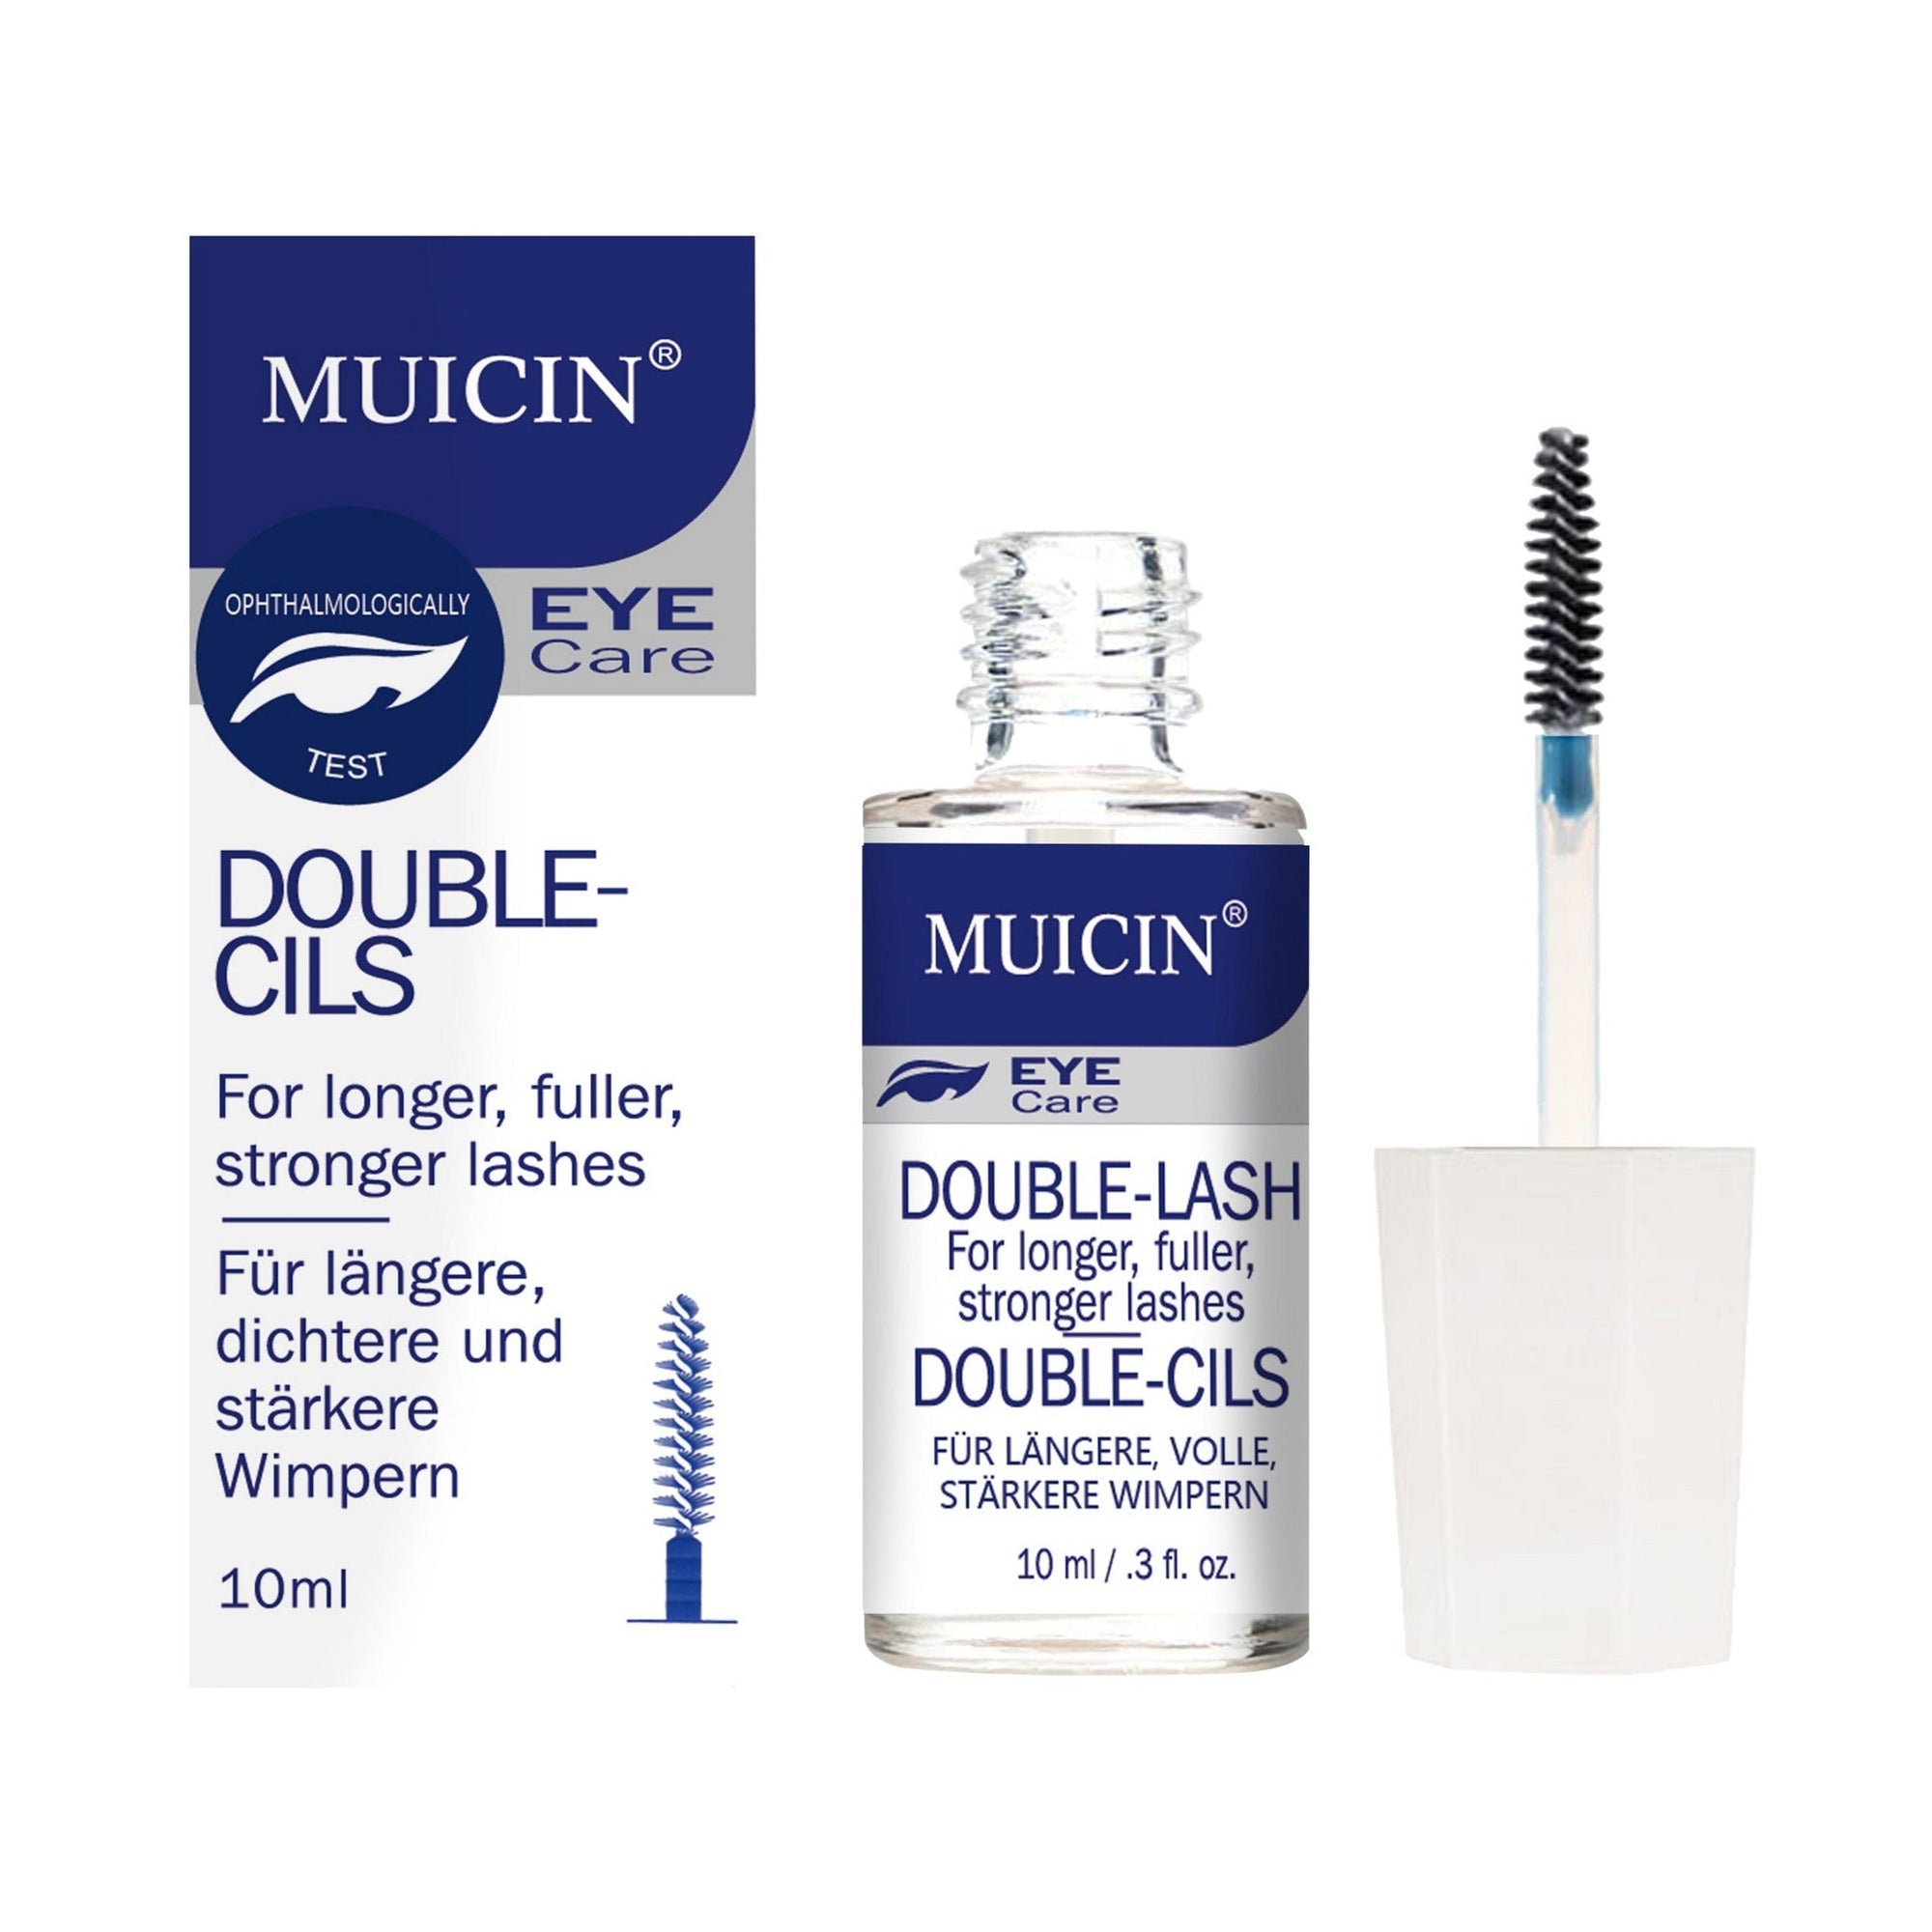 Buy  MUICIN - Double-Cils Nutritive Eye Lashes Serum - 10ml - at Best Price Online in Pakistan